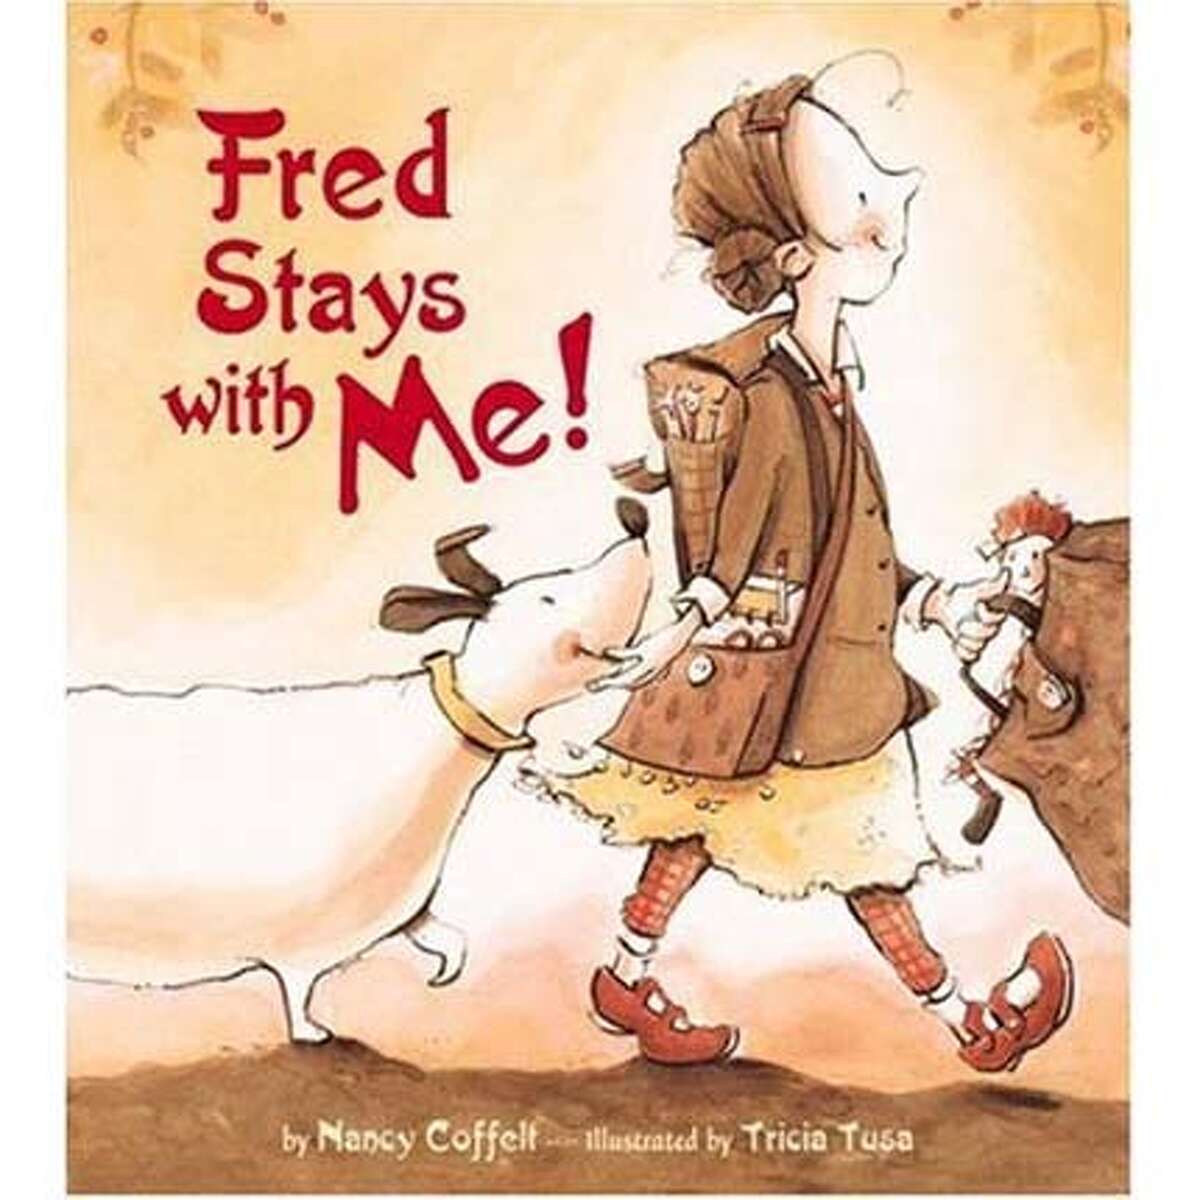 "Fred Stays With Me!" by Nancy Coffelt and illustrated by Tricia Tusa (Little, Brown; 32 pages; $16.99; ages 4-8)